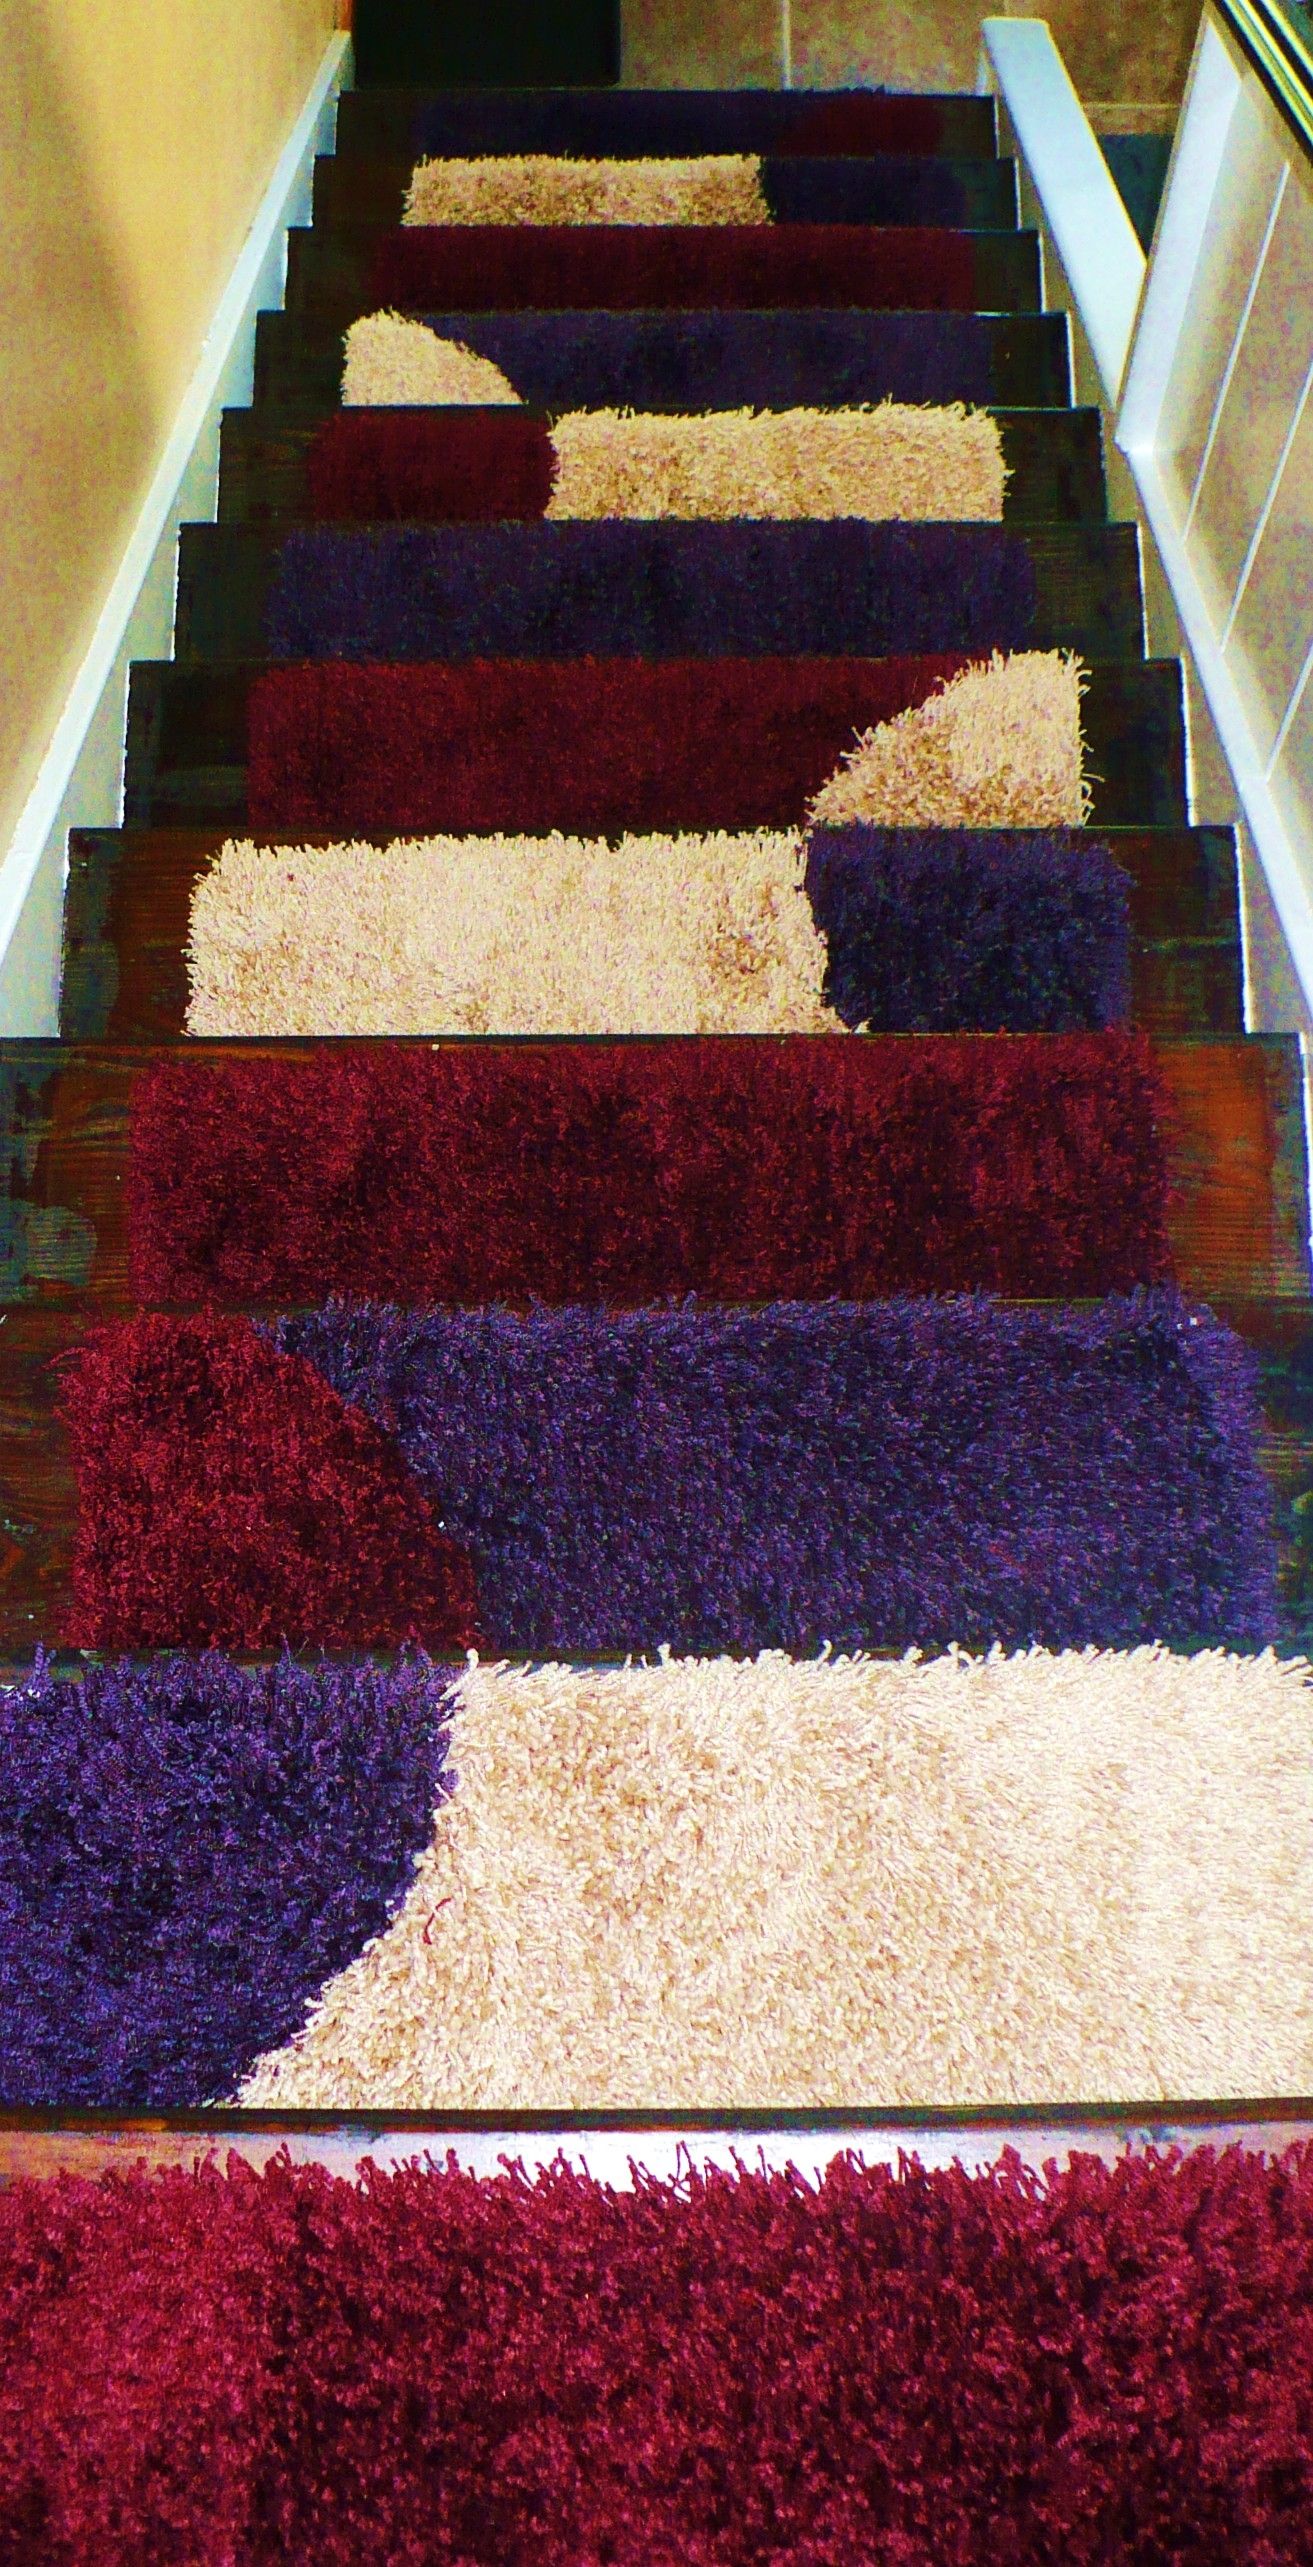 My Area Rug For The Stairs Custom Made Out Of Carpet Samples Inside Custom Made Area Rugs (View 9 of 15)